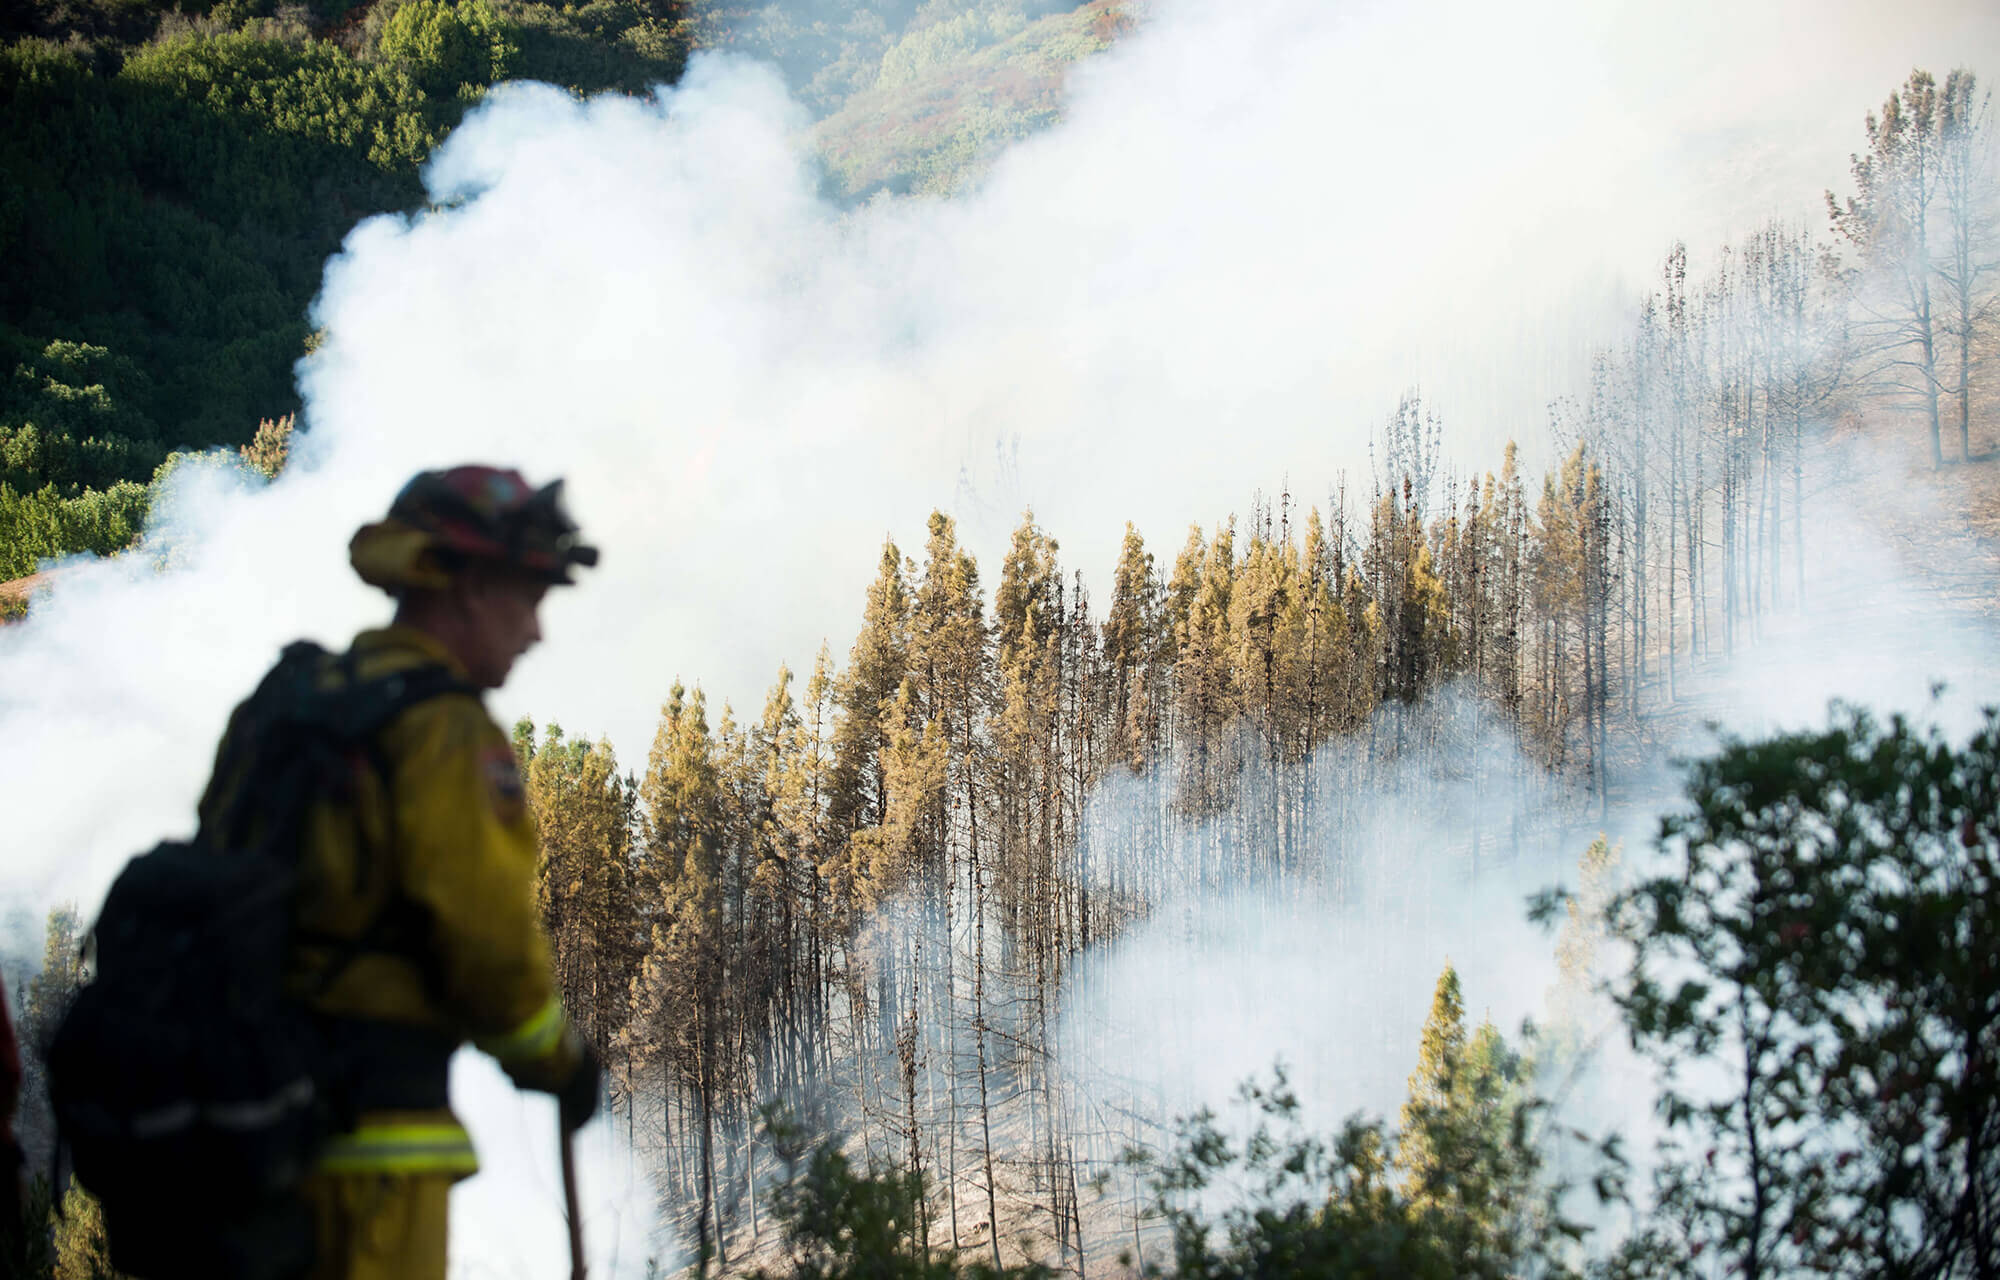 Image of firefighter in front of wildfire